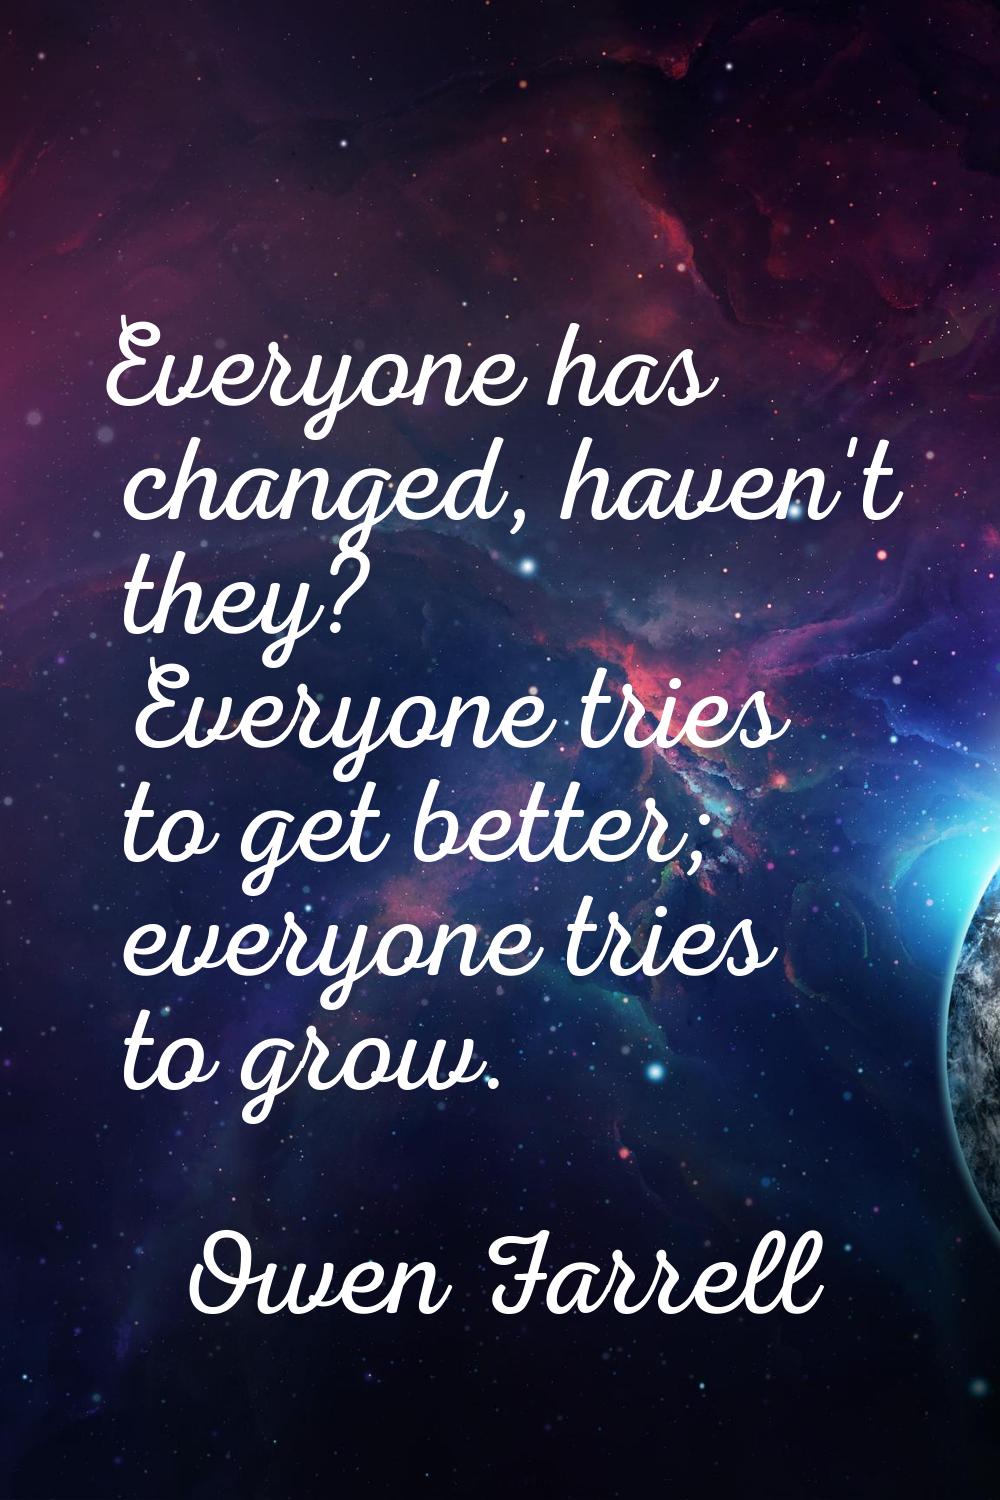 Everyone has changed, haven't they? Everyone tries to get better; everyone tries to grow.